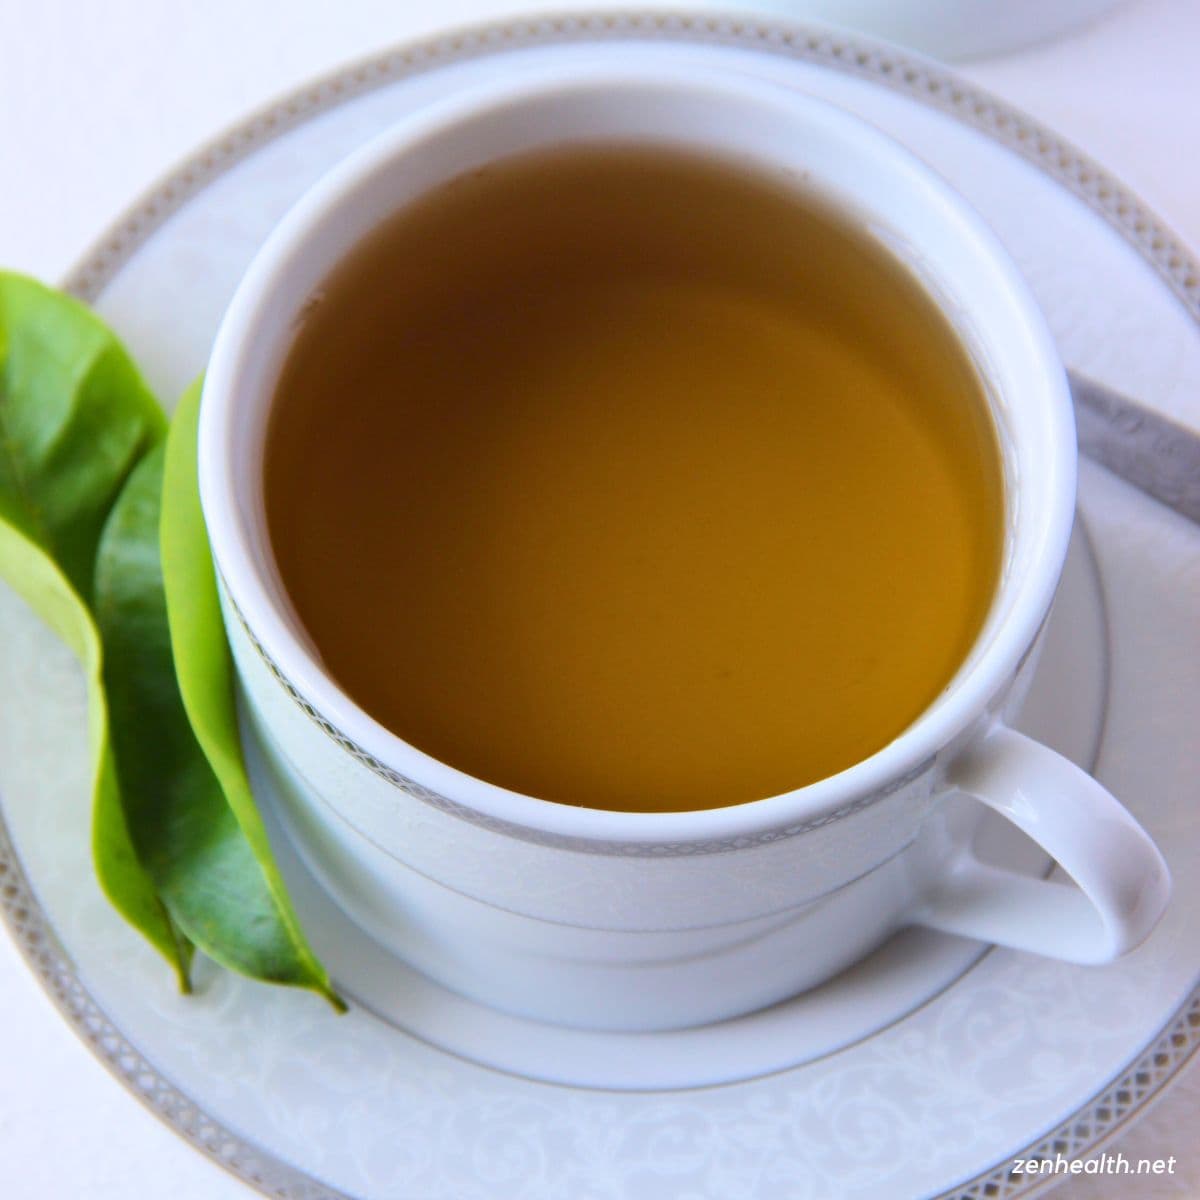 How to Make Soursop Tea from Leaves (Plus Proven Benefits)